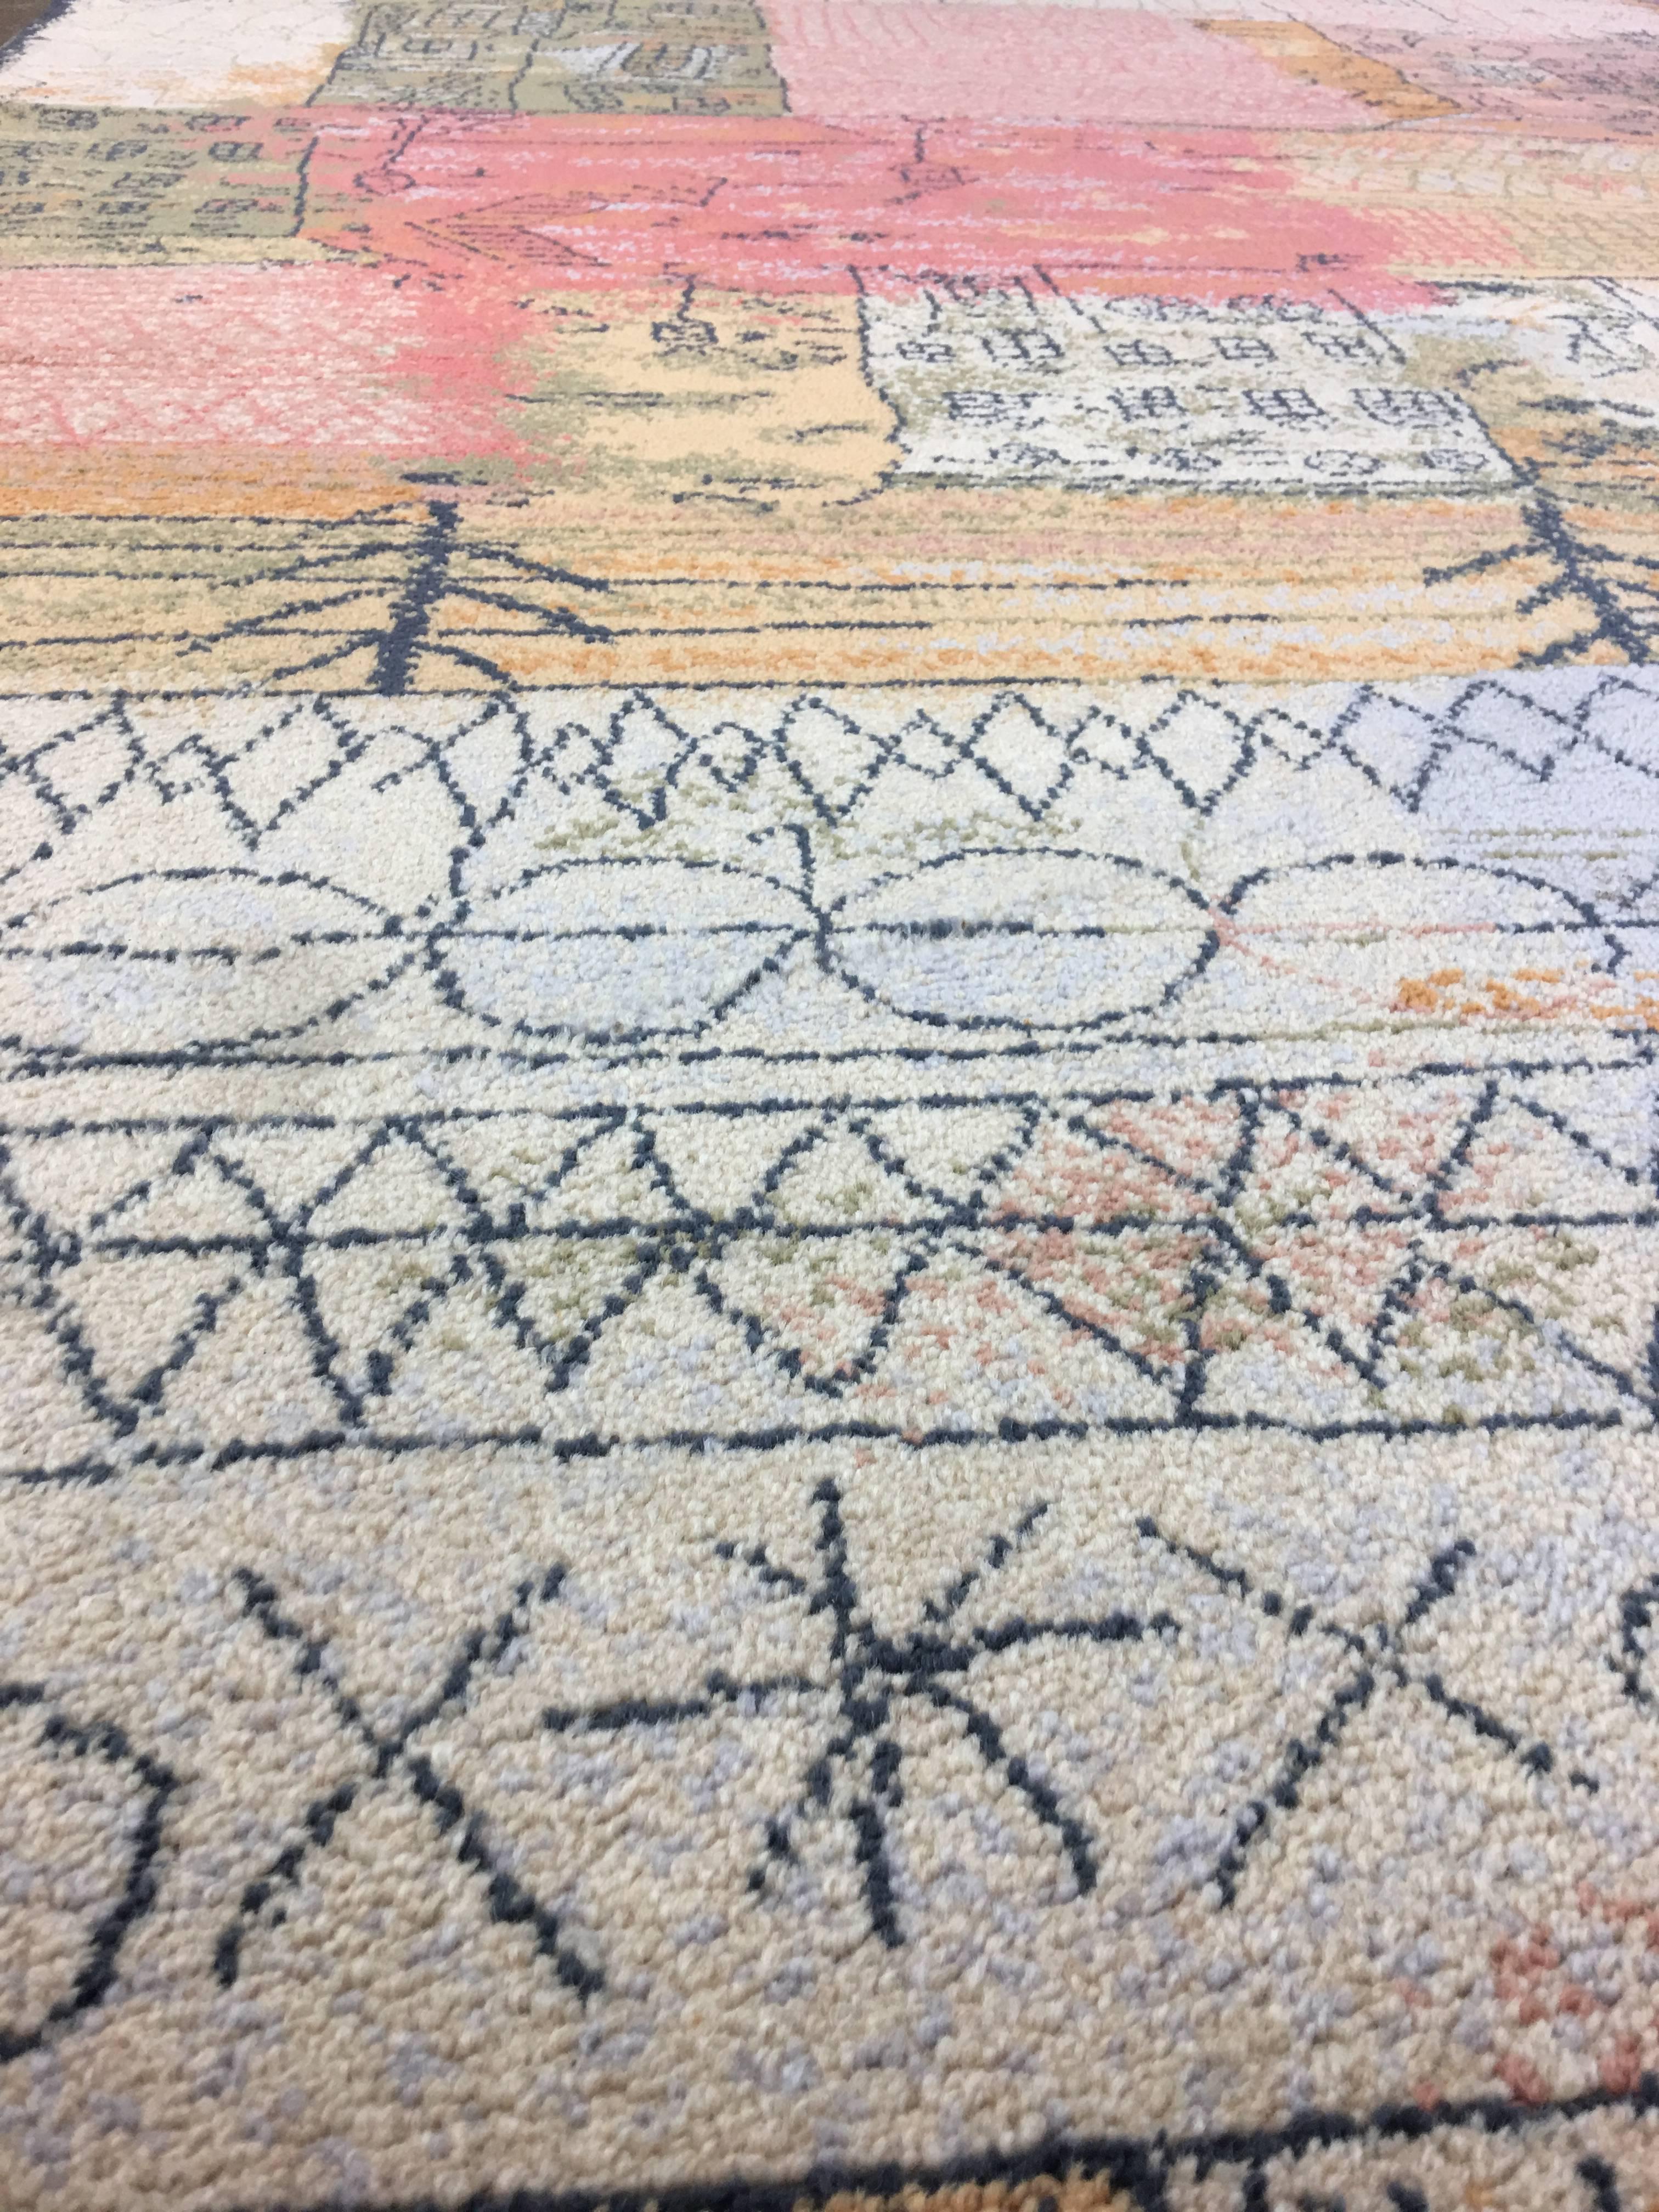 Phenomenal large area rug design after Paul Klee manufactured by Ege Axminster A/S. This the larger of two matching rugs we have available. Rug has been professionally cleaned by renowned rug cleaner Robert Mann of Denver, Co. Measures: